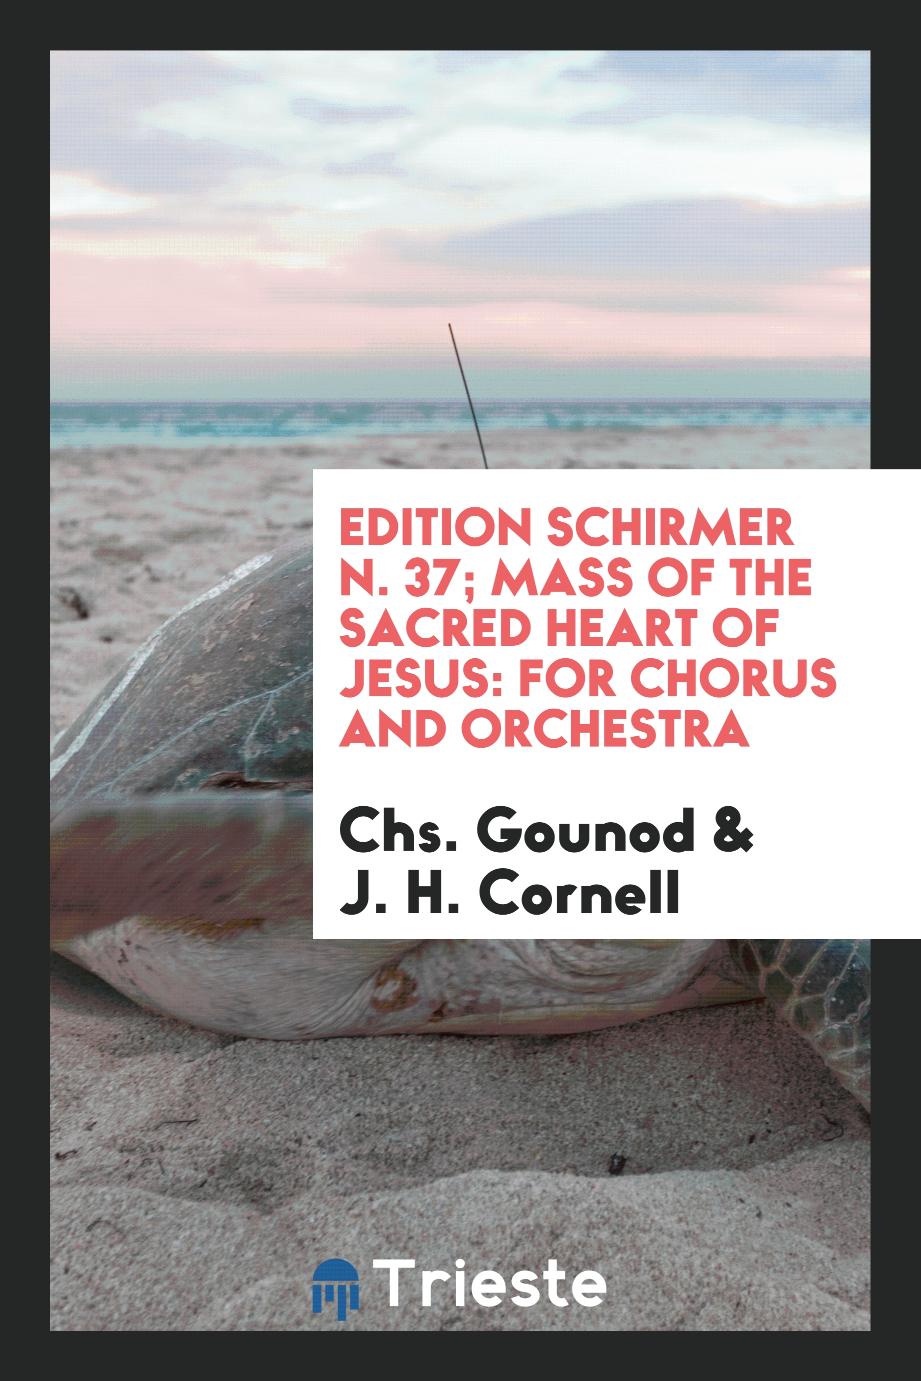 Edition Schirmer N. 37; Mass of the sacred heart of Jesus: for chorus and orchestra